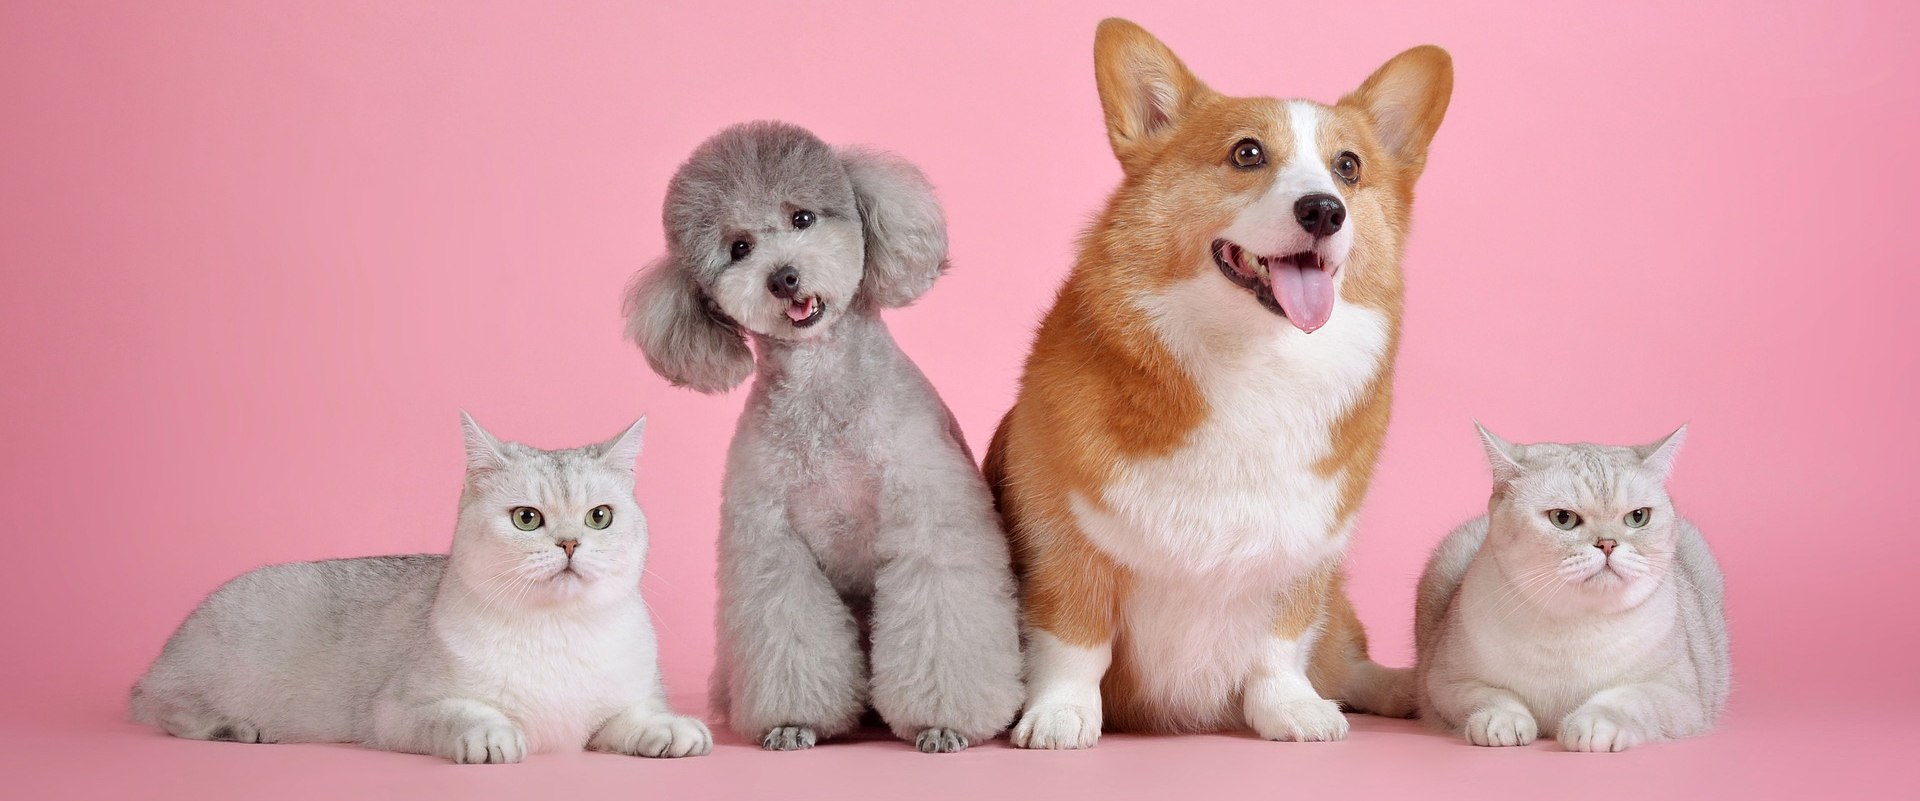 cute Cats and Dogs, comparing cats against dogs